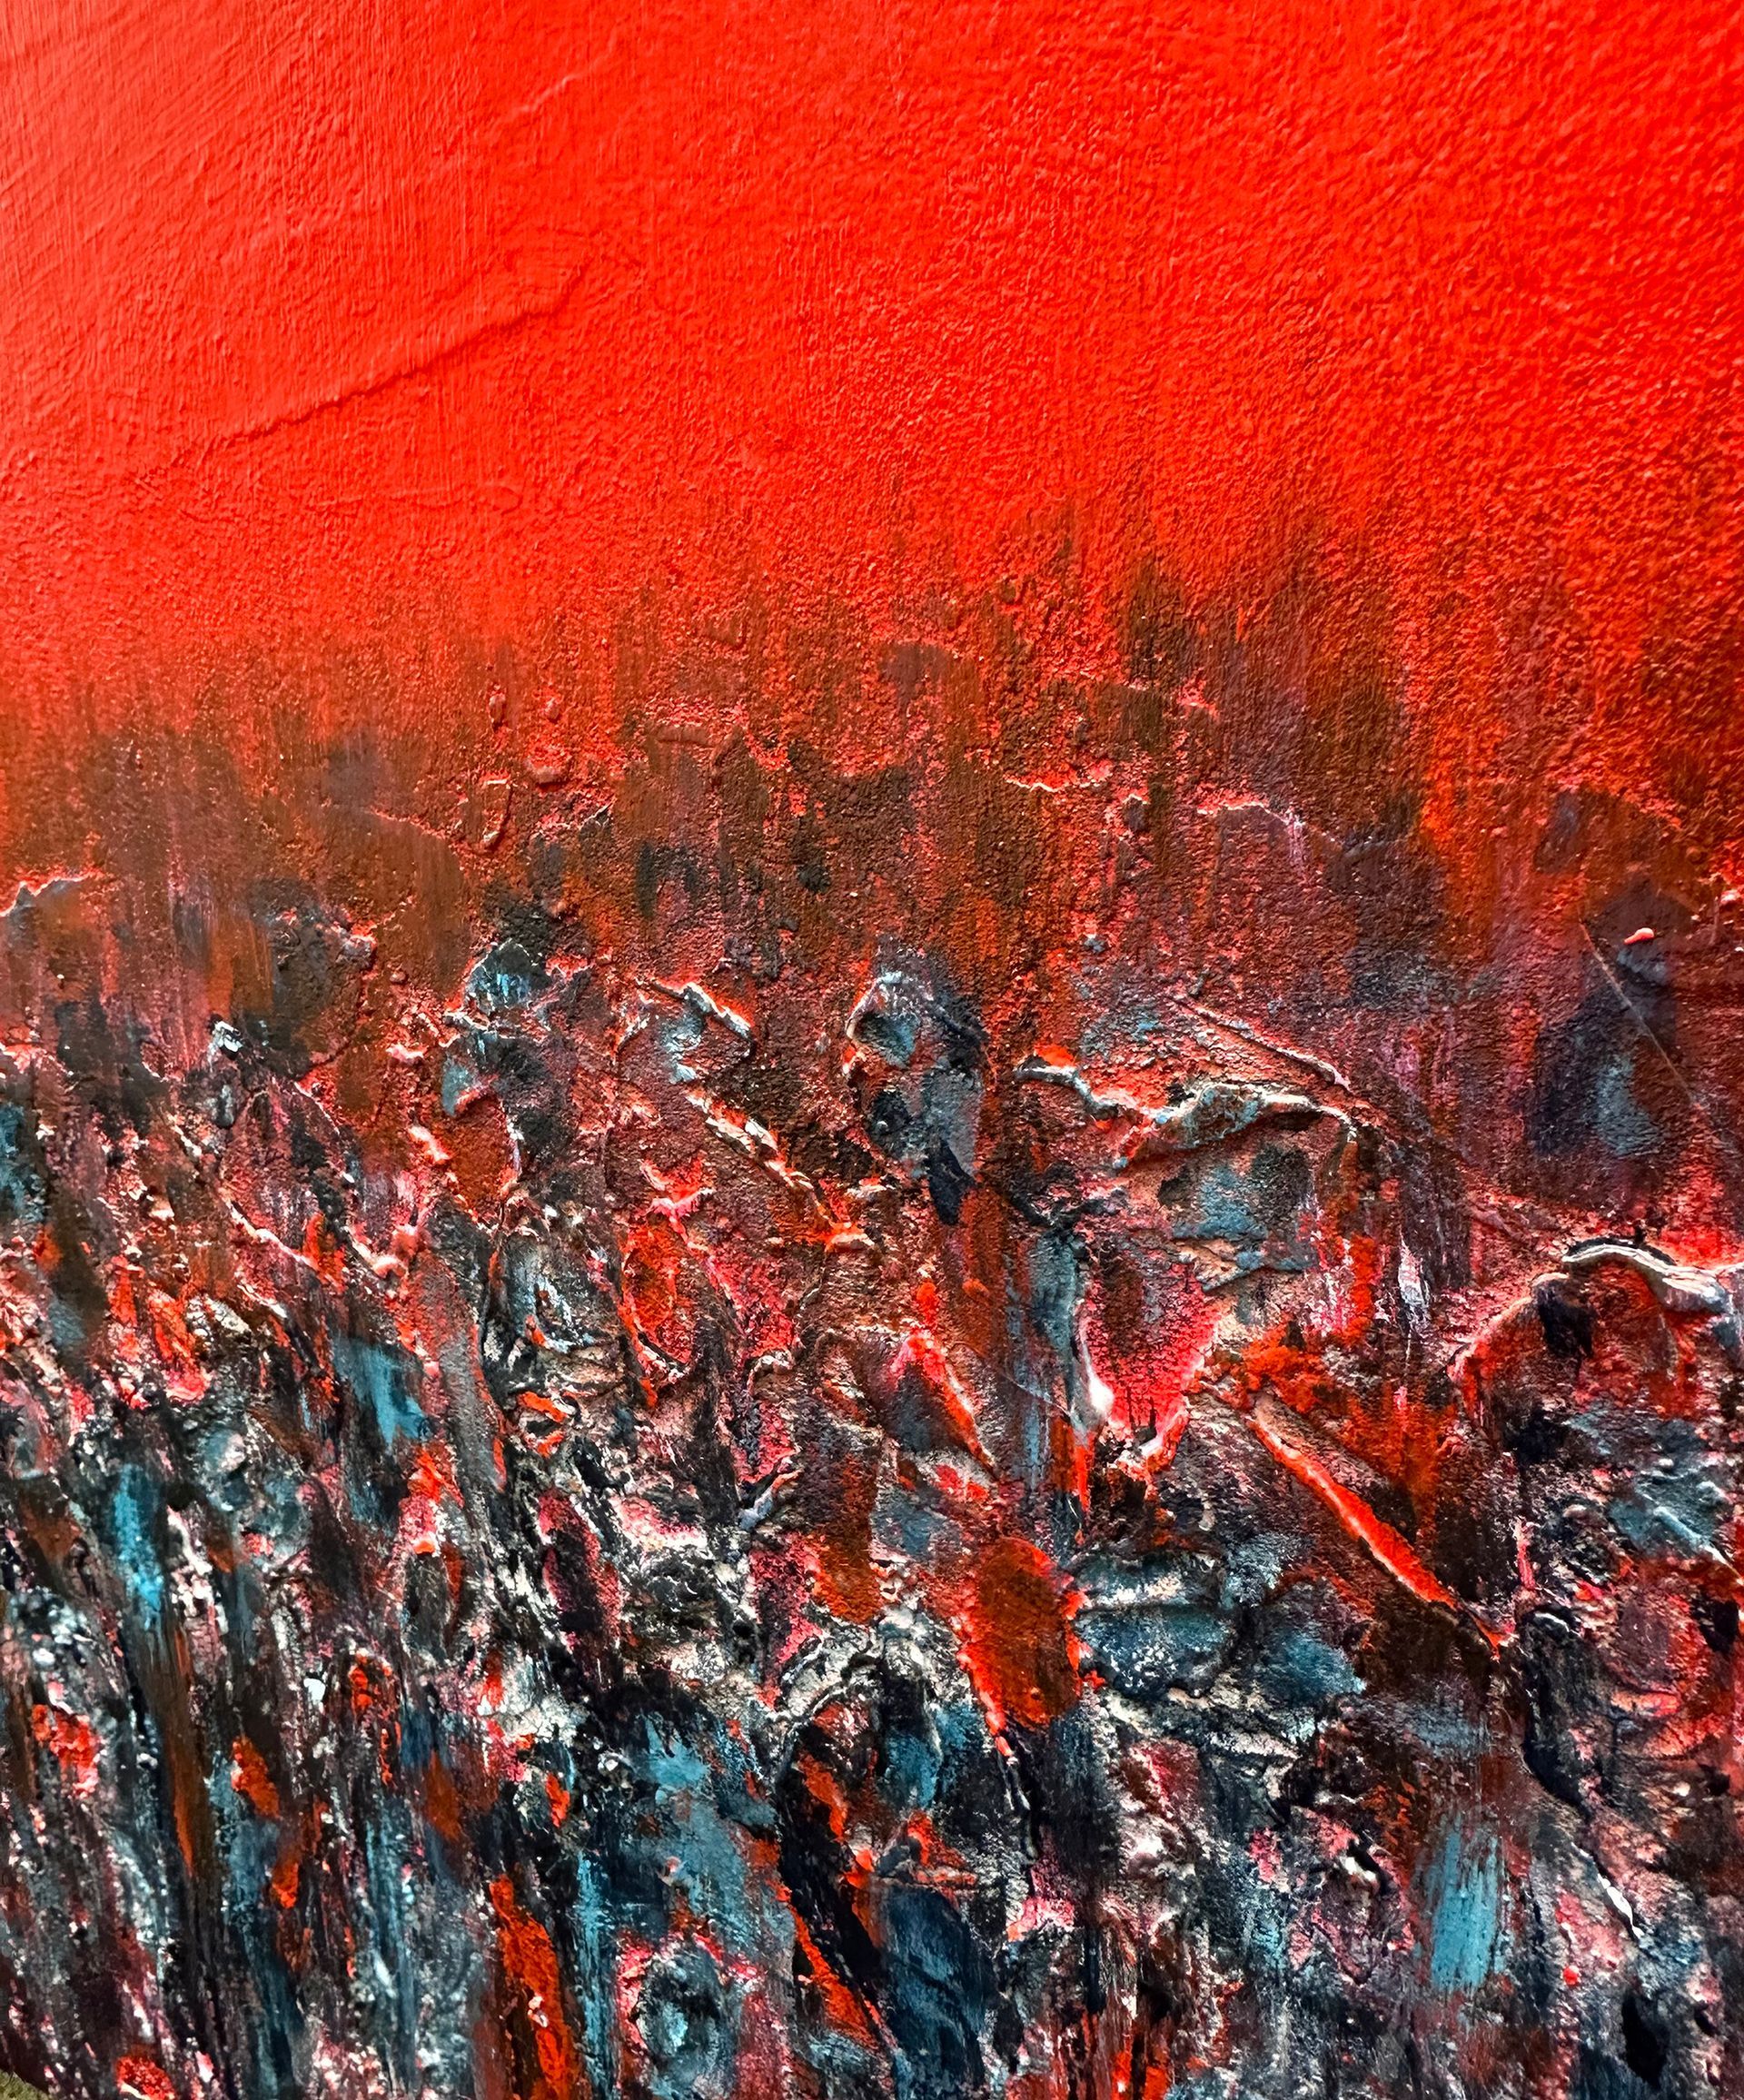 Close up of painting showing figurative elements in dark blue and white set against a red background